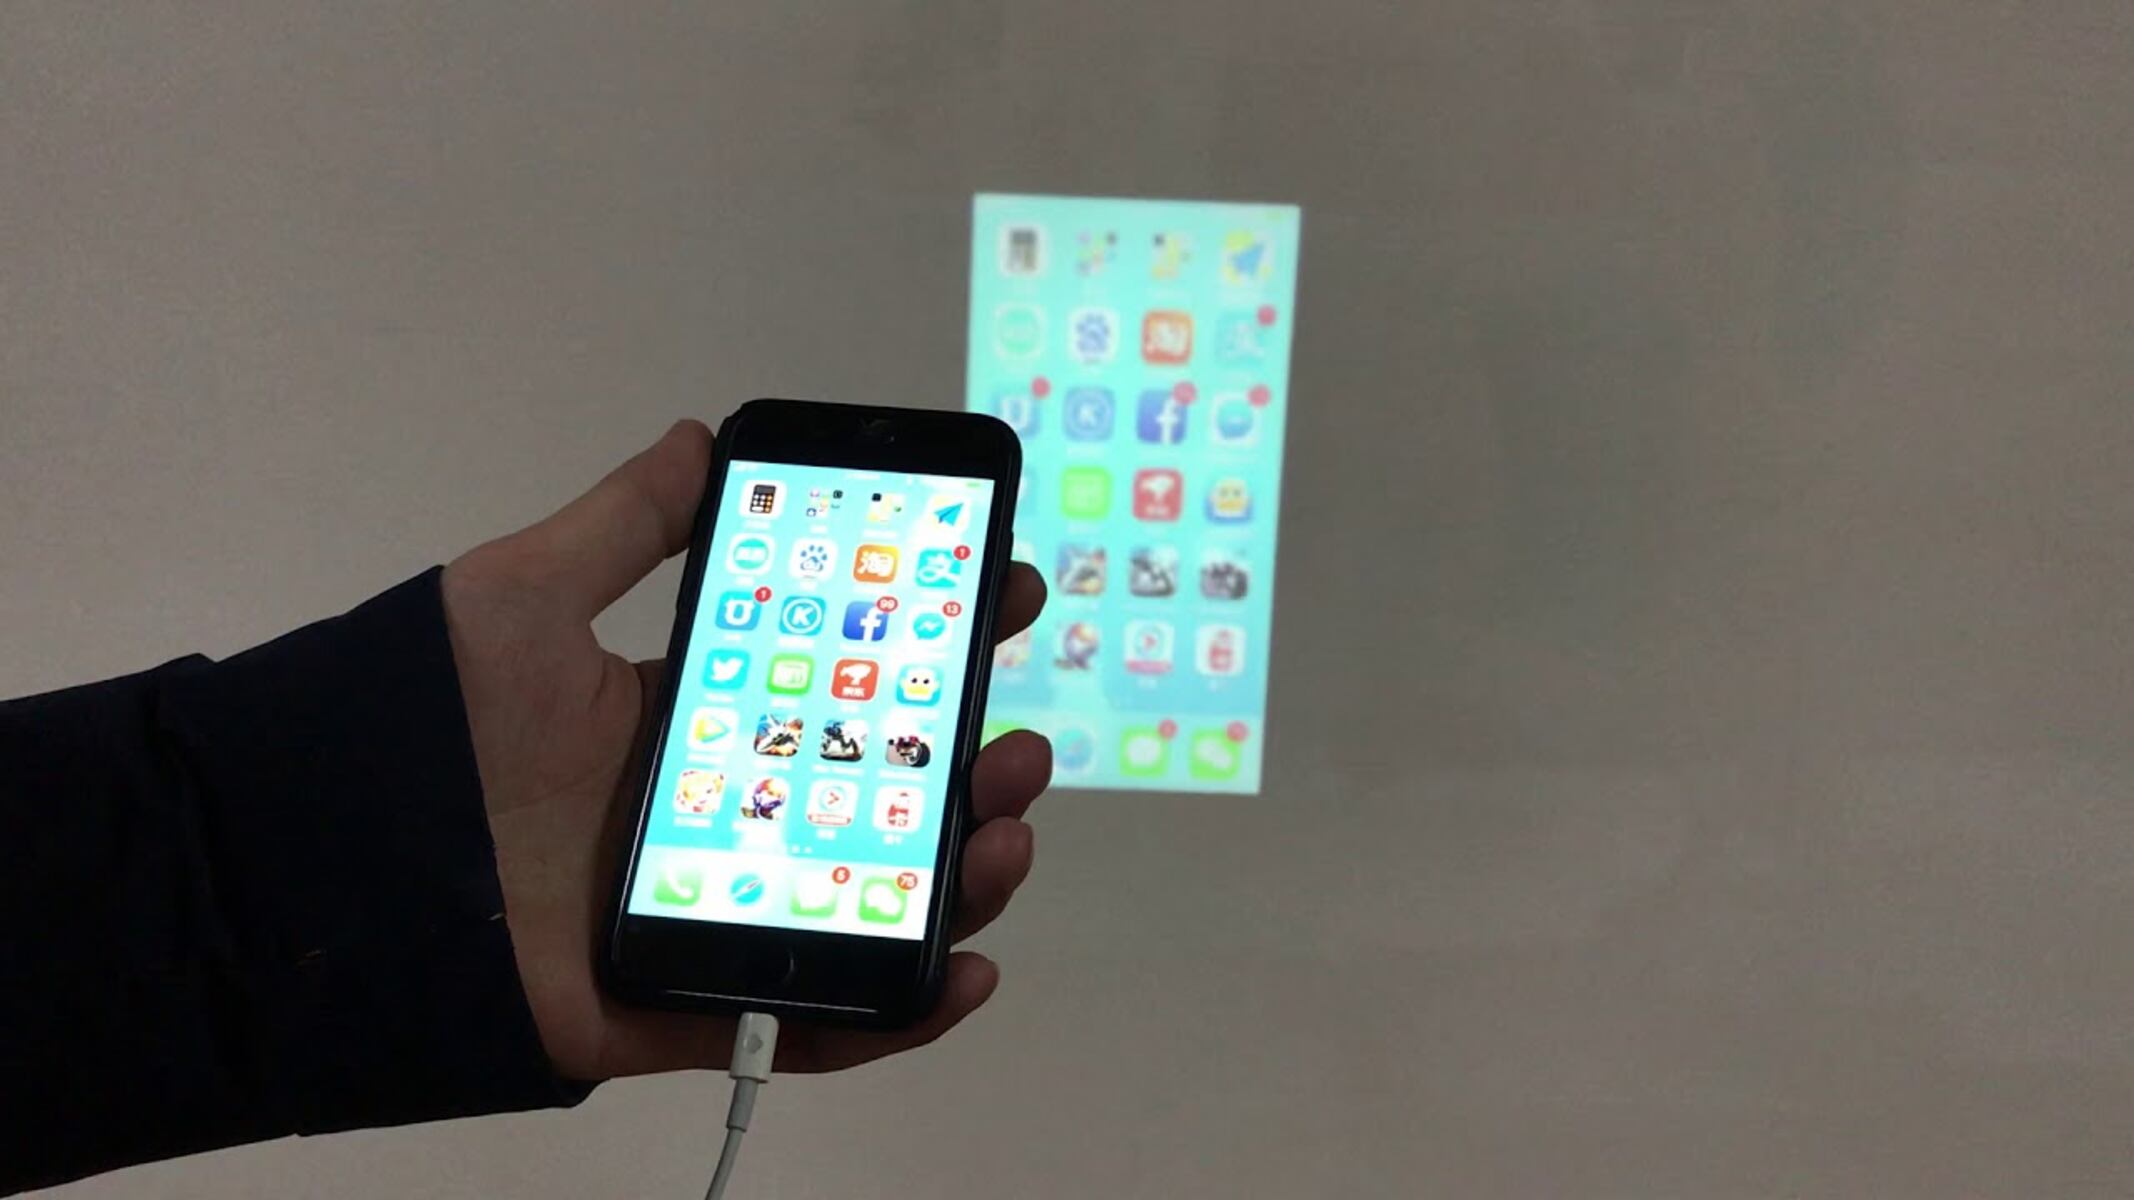 How To Screen Mirror IPhone To Projector